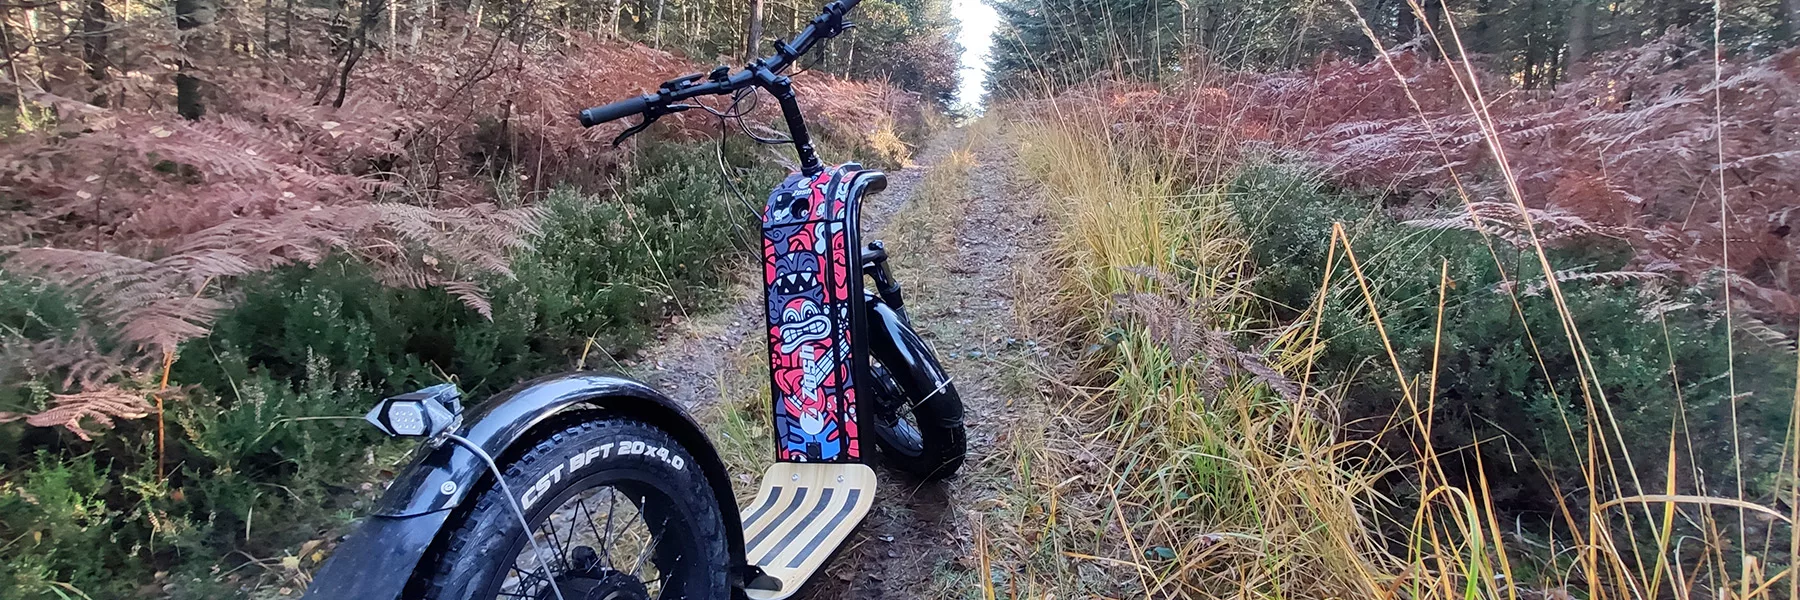 French manufacturer of all-terrain electric scooters